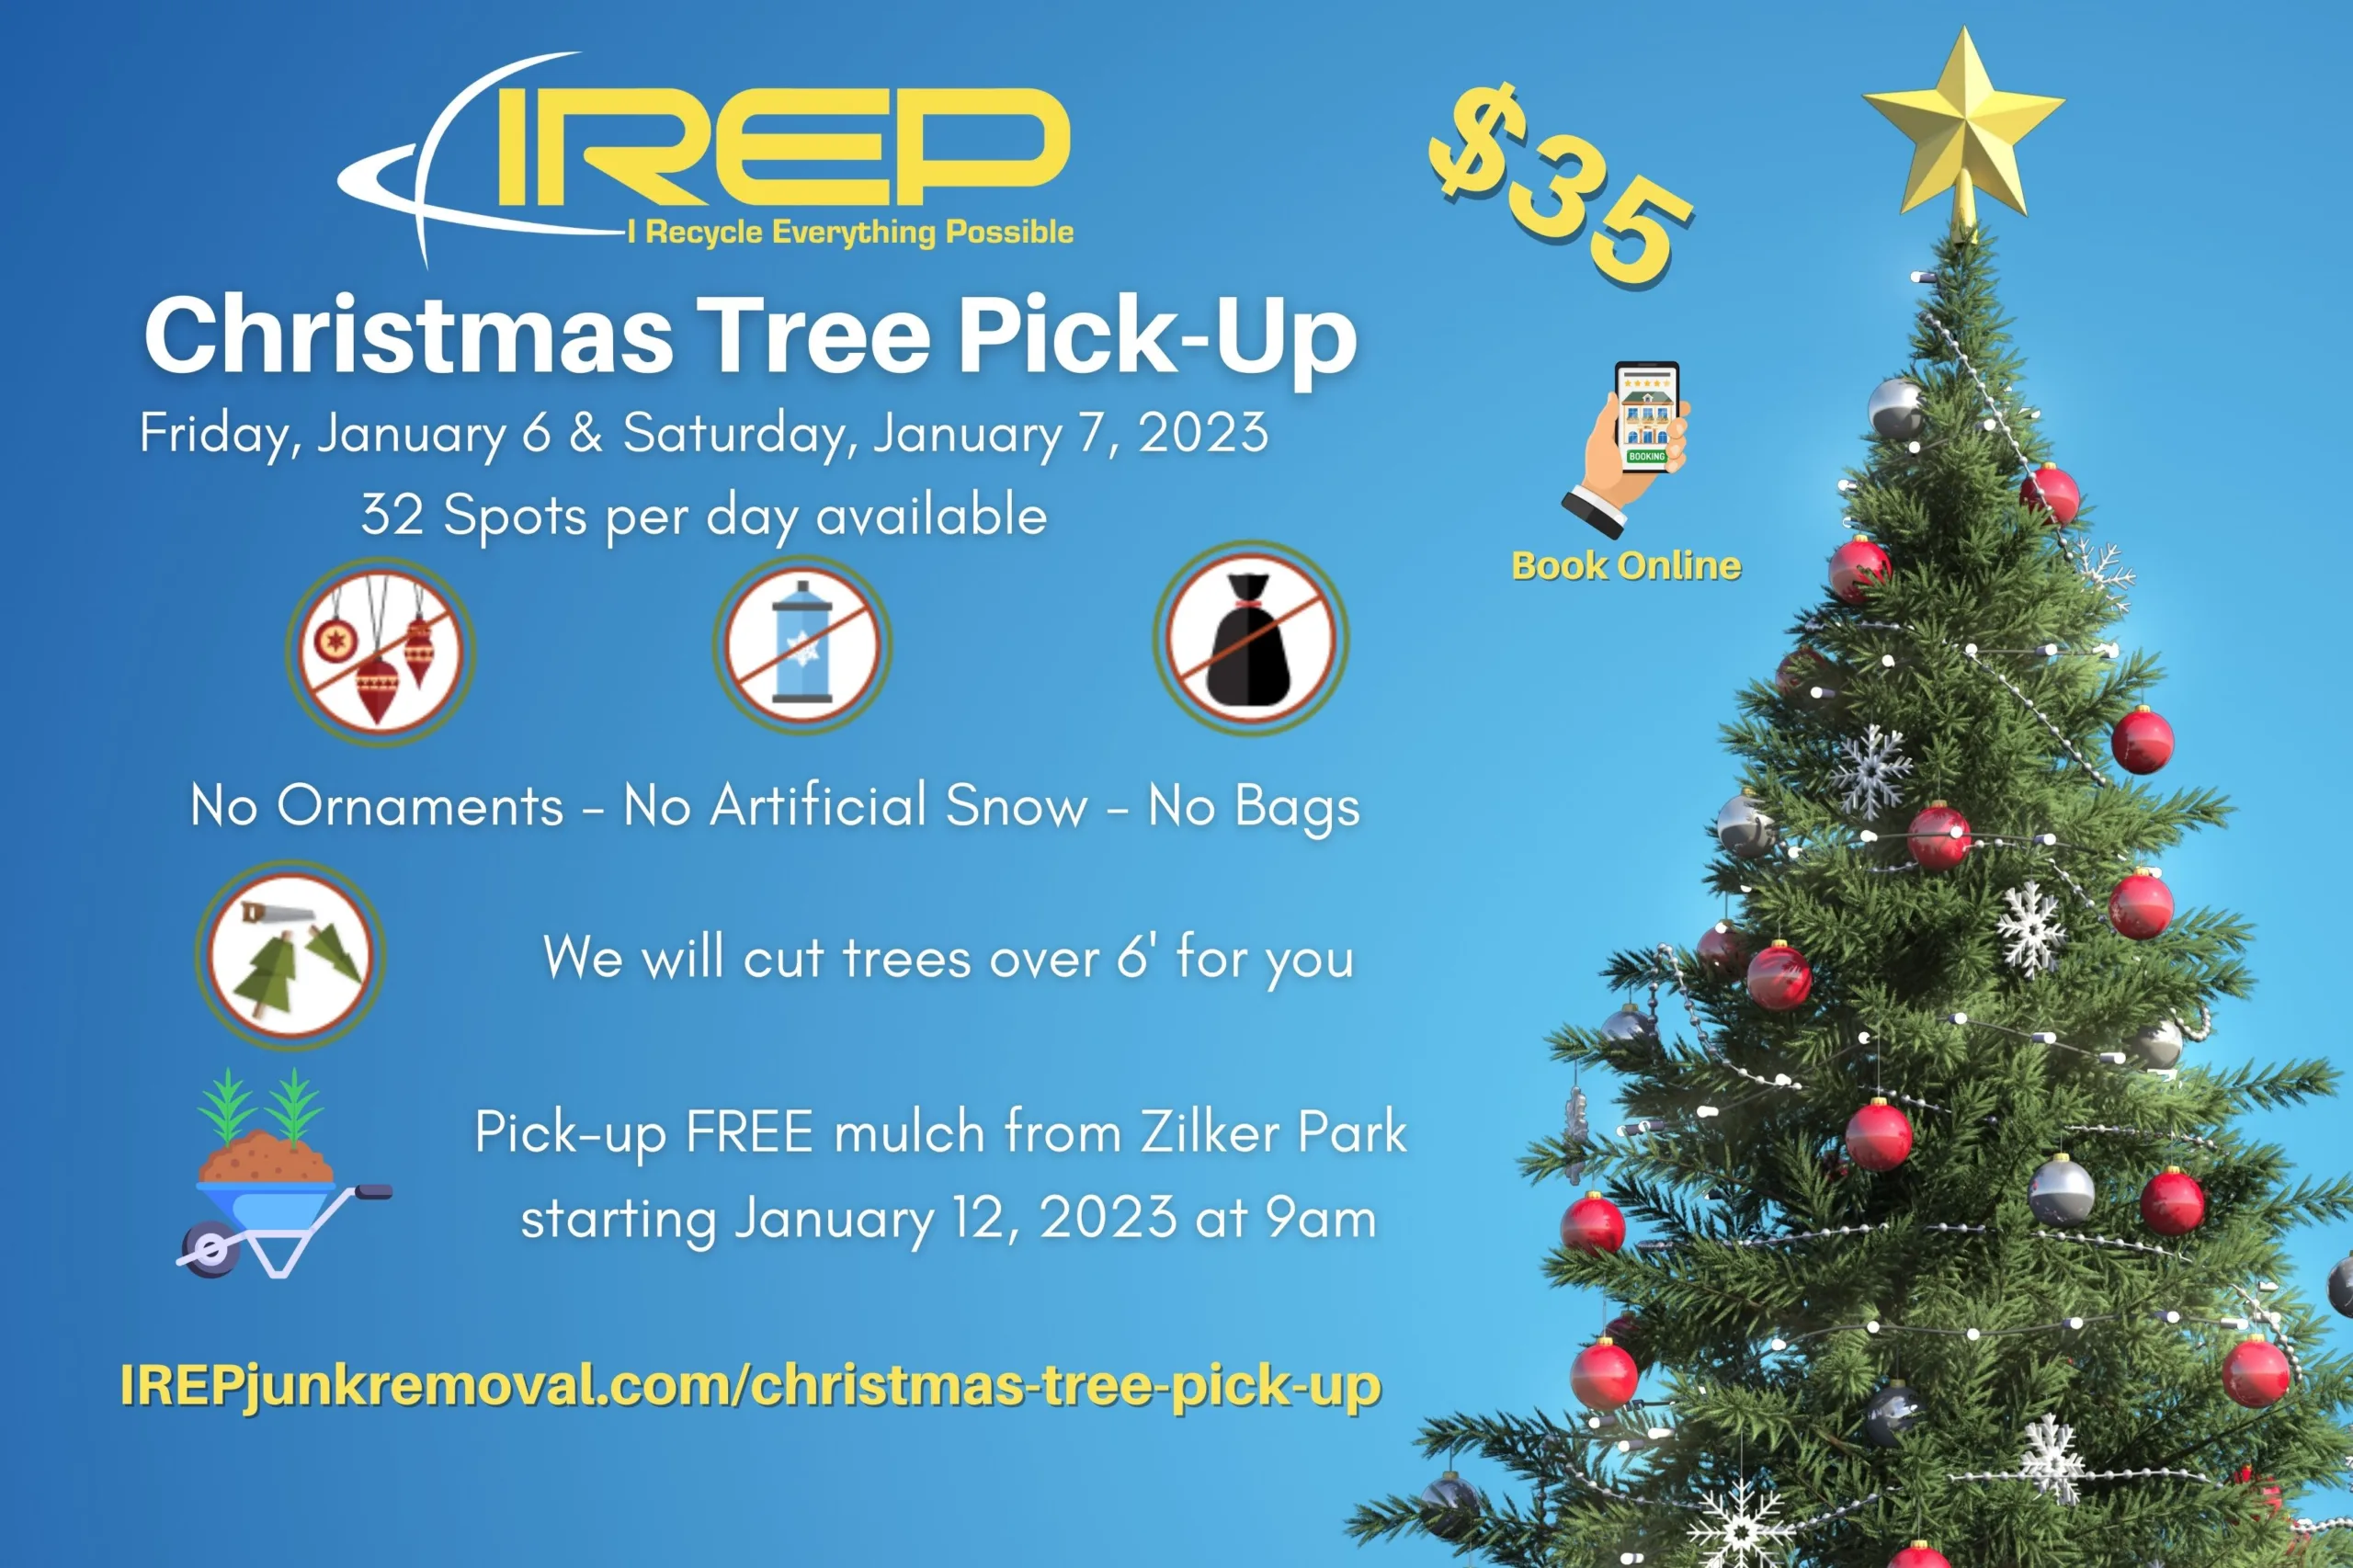 IREP Junk Removal Christmas tree pickup to recycle and turn into mulch at Zilker Park in Austin, TX